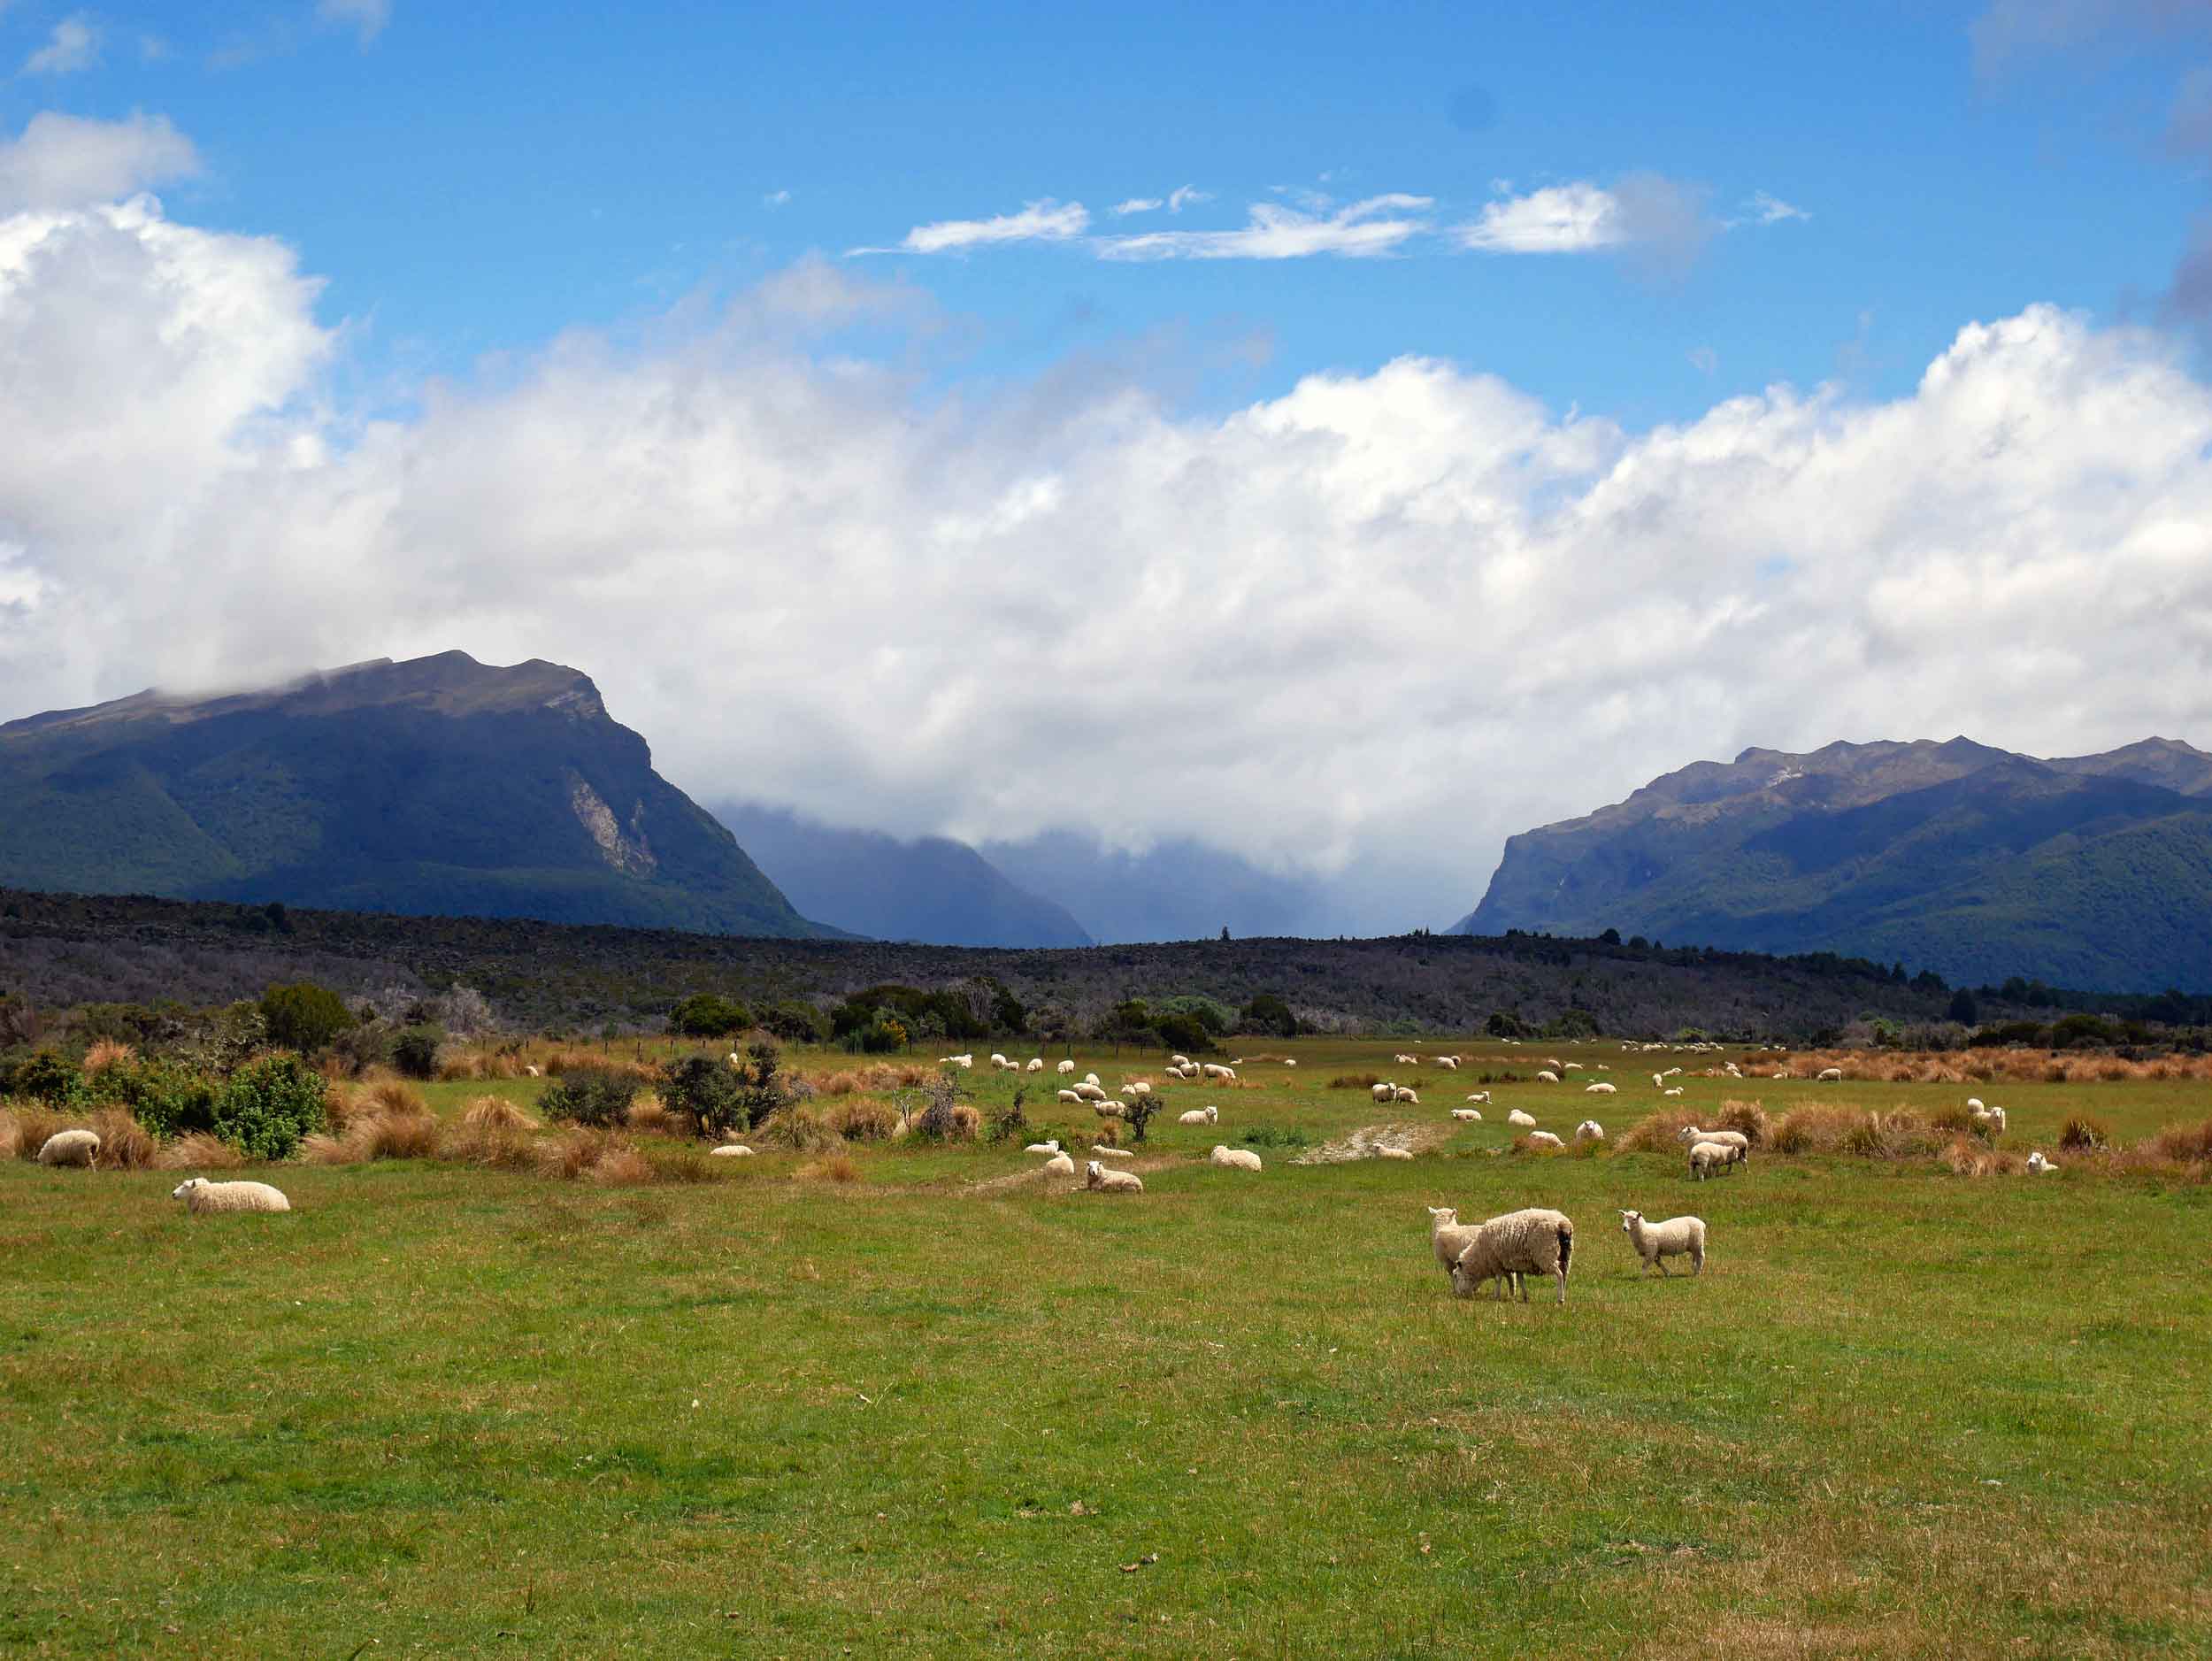  Another typical NZ scene, some of the country's nearly 30 million sheep (Jan 8).&nbsp; 